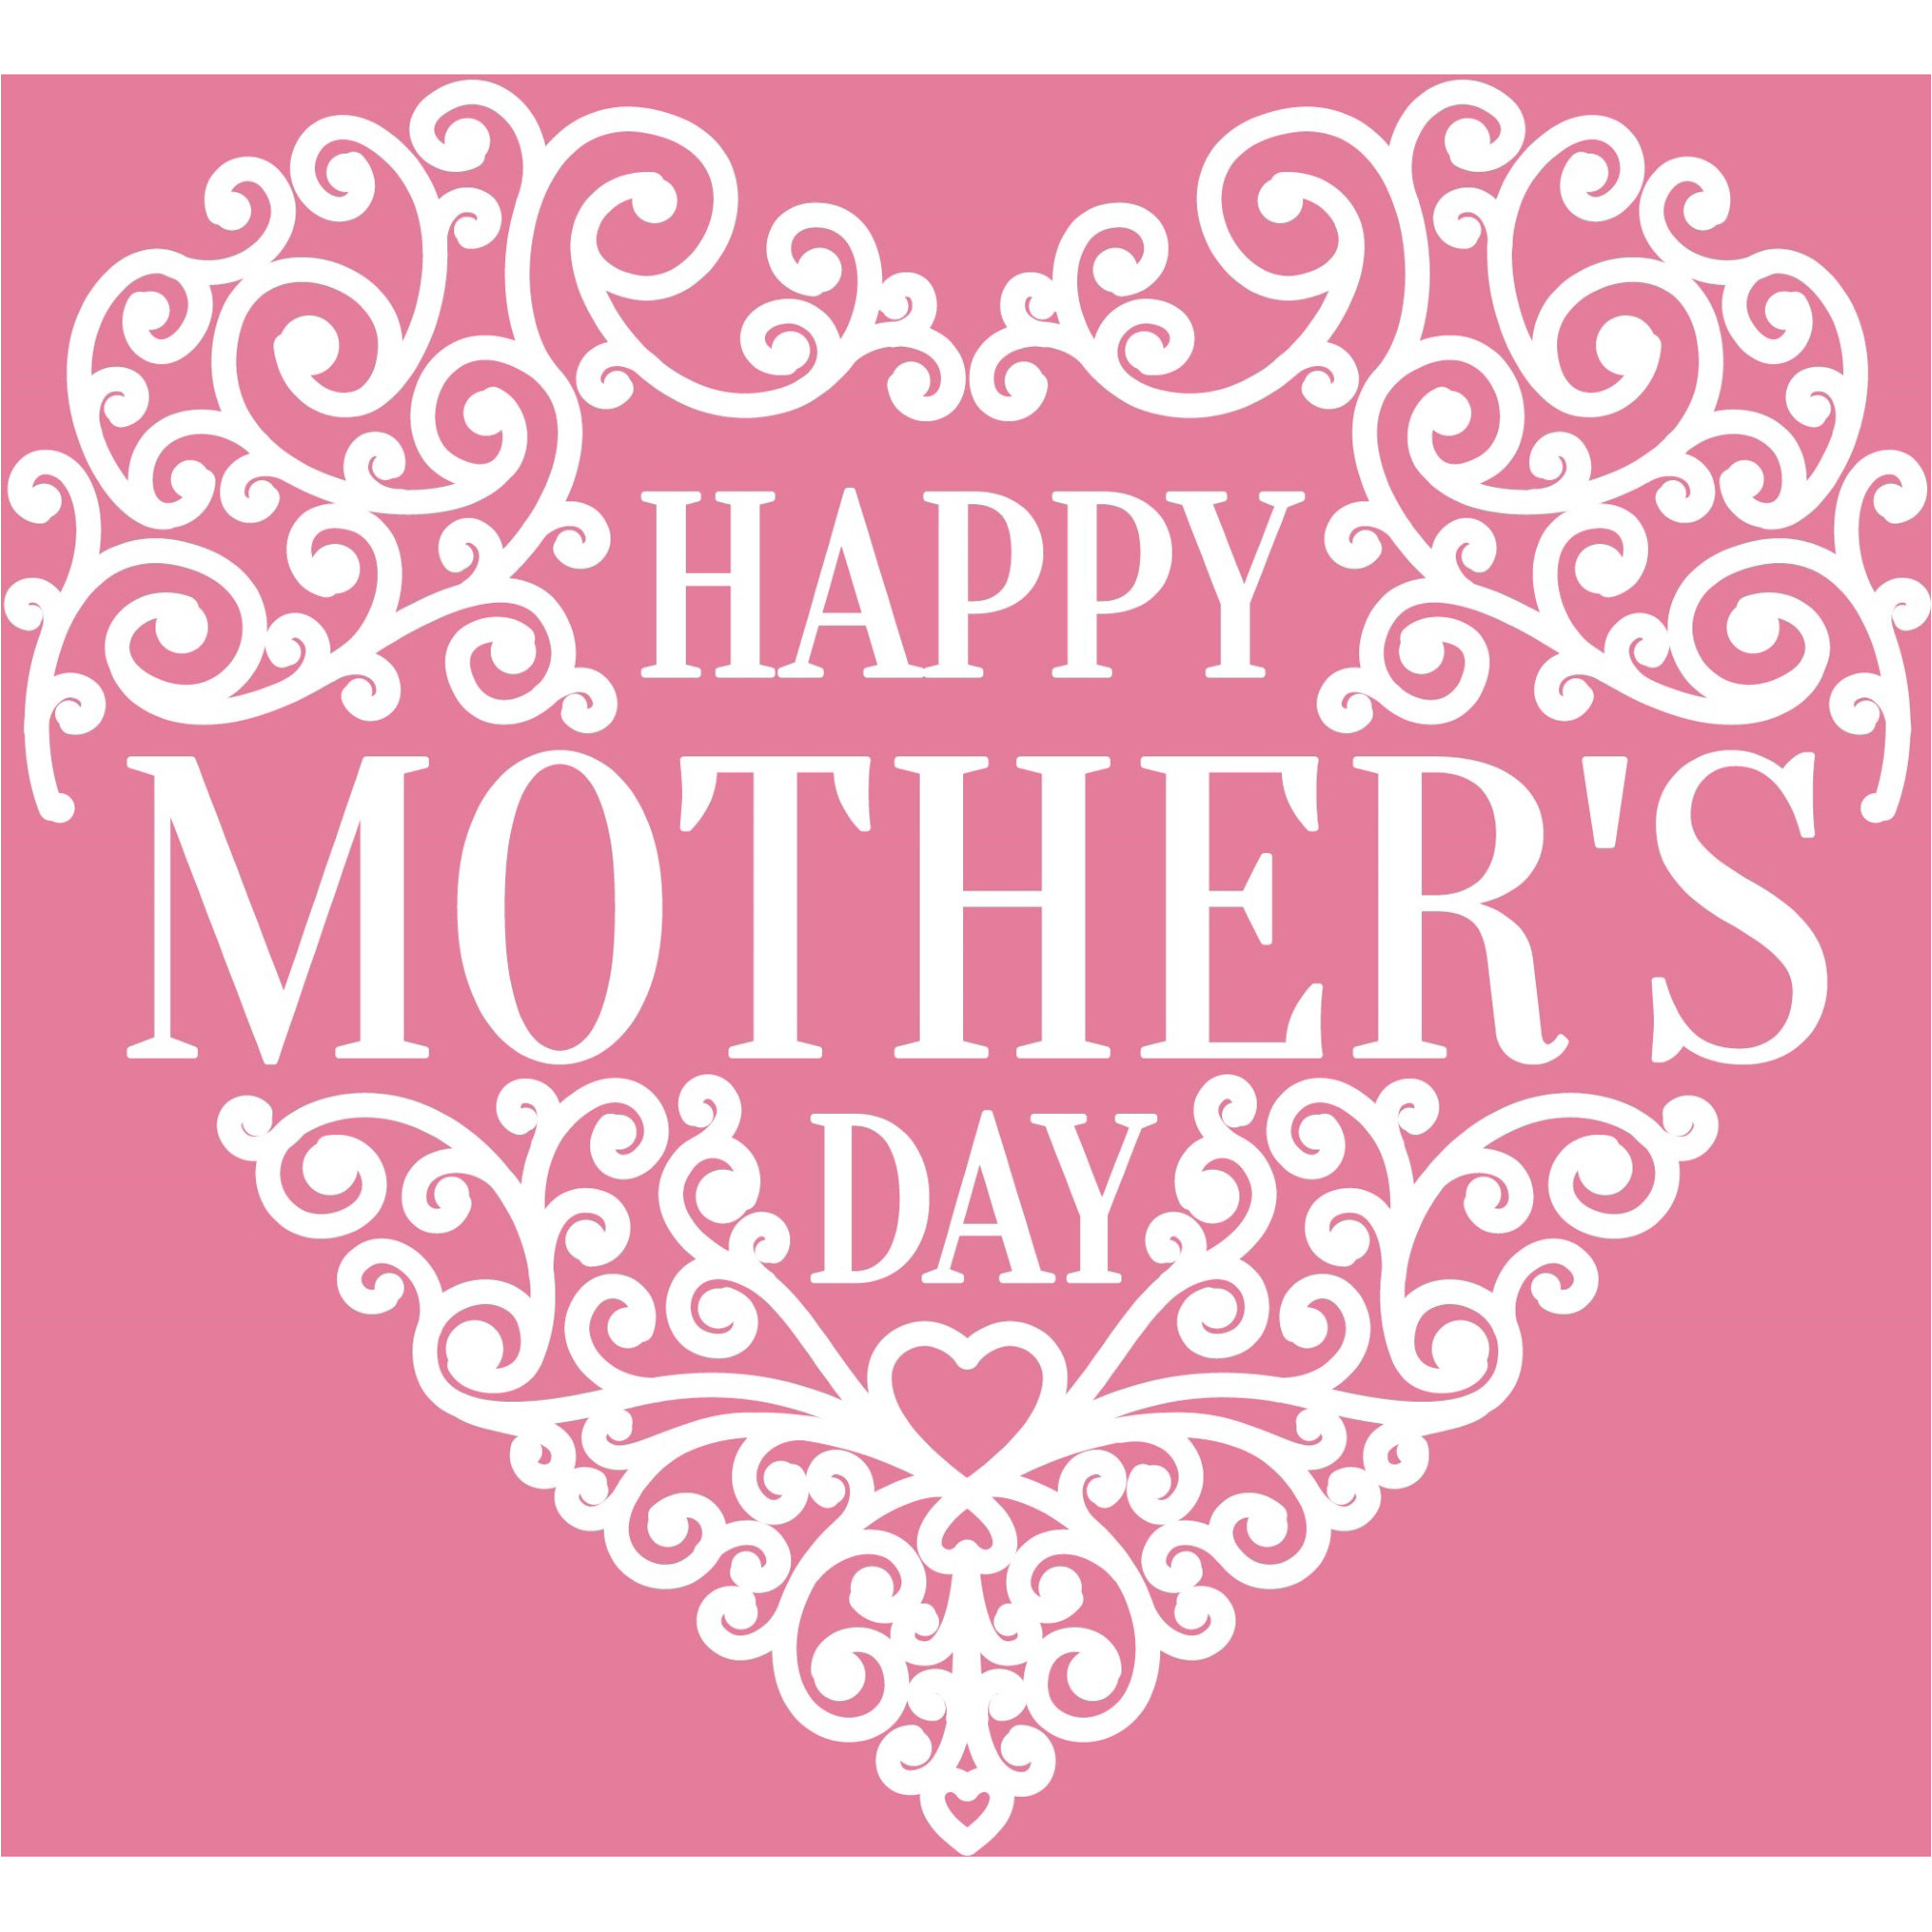 free-download-download-happy-mothers-day-heart-design-vector-greeting